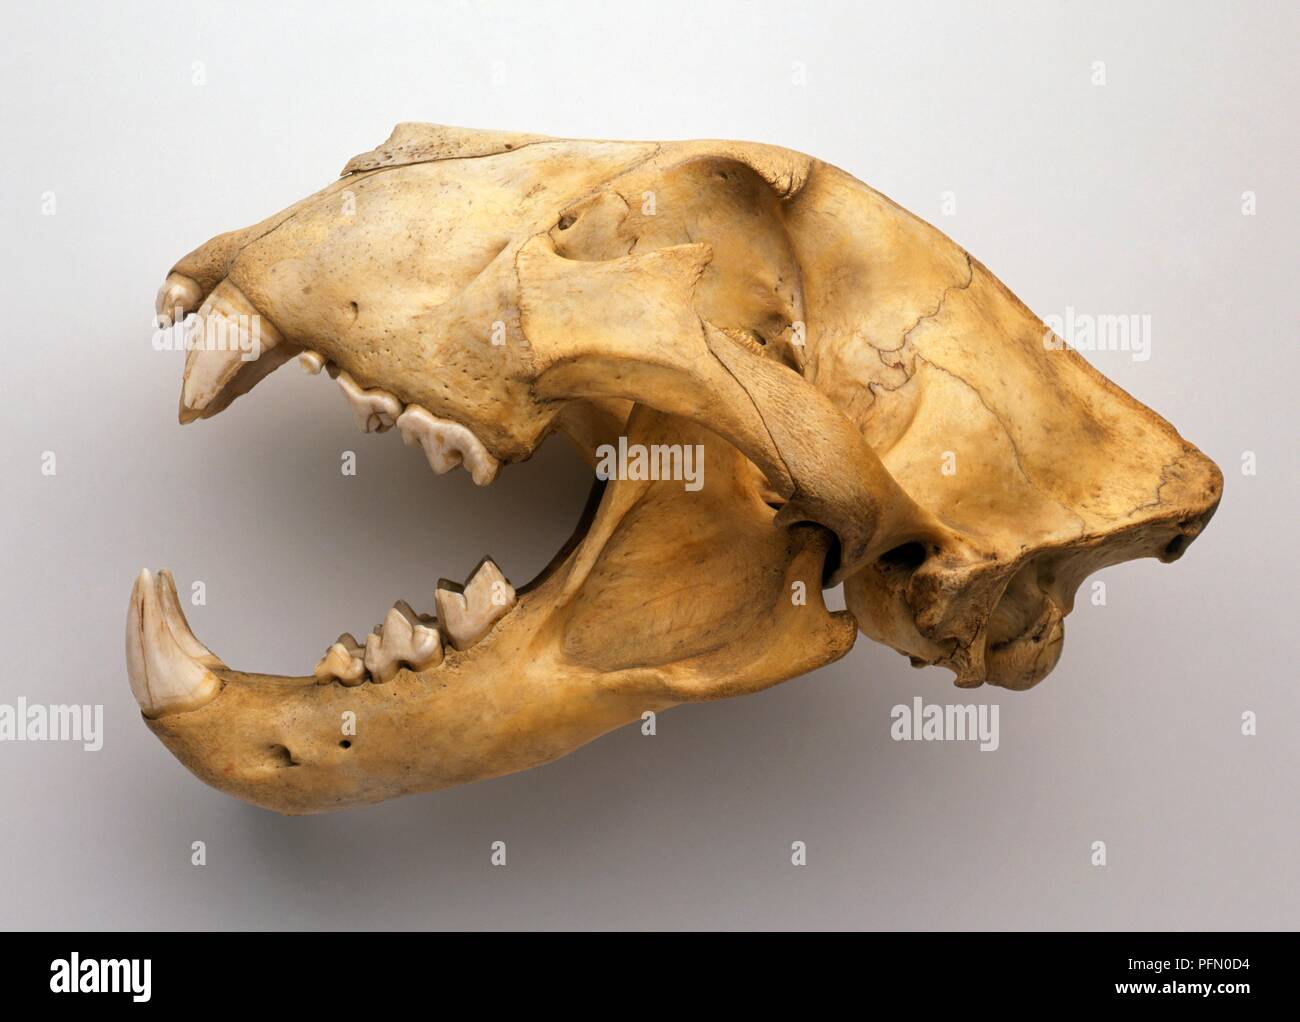 Lion skull, side view Stock Photo